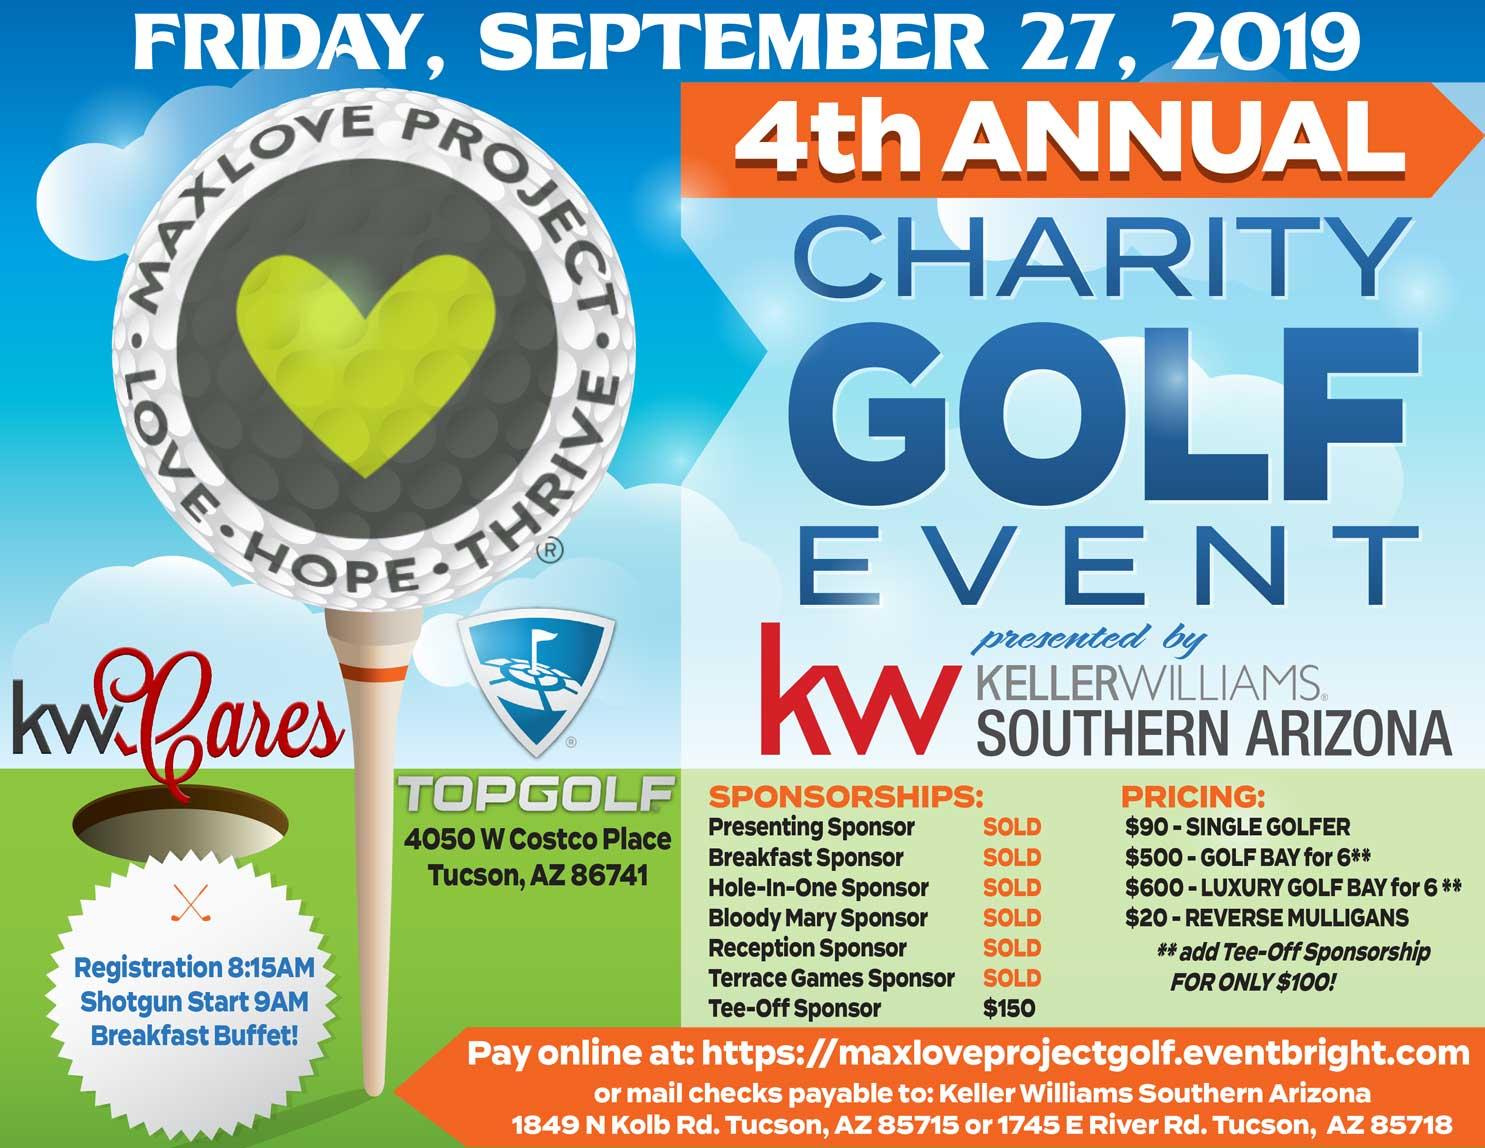 4th Annual Charity Golf Event benefiting Max Love Project